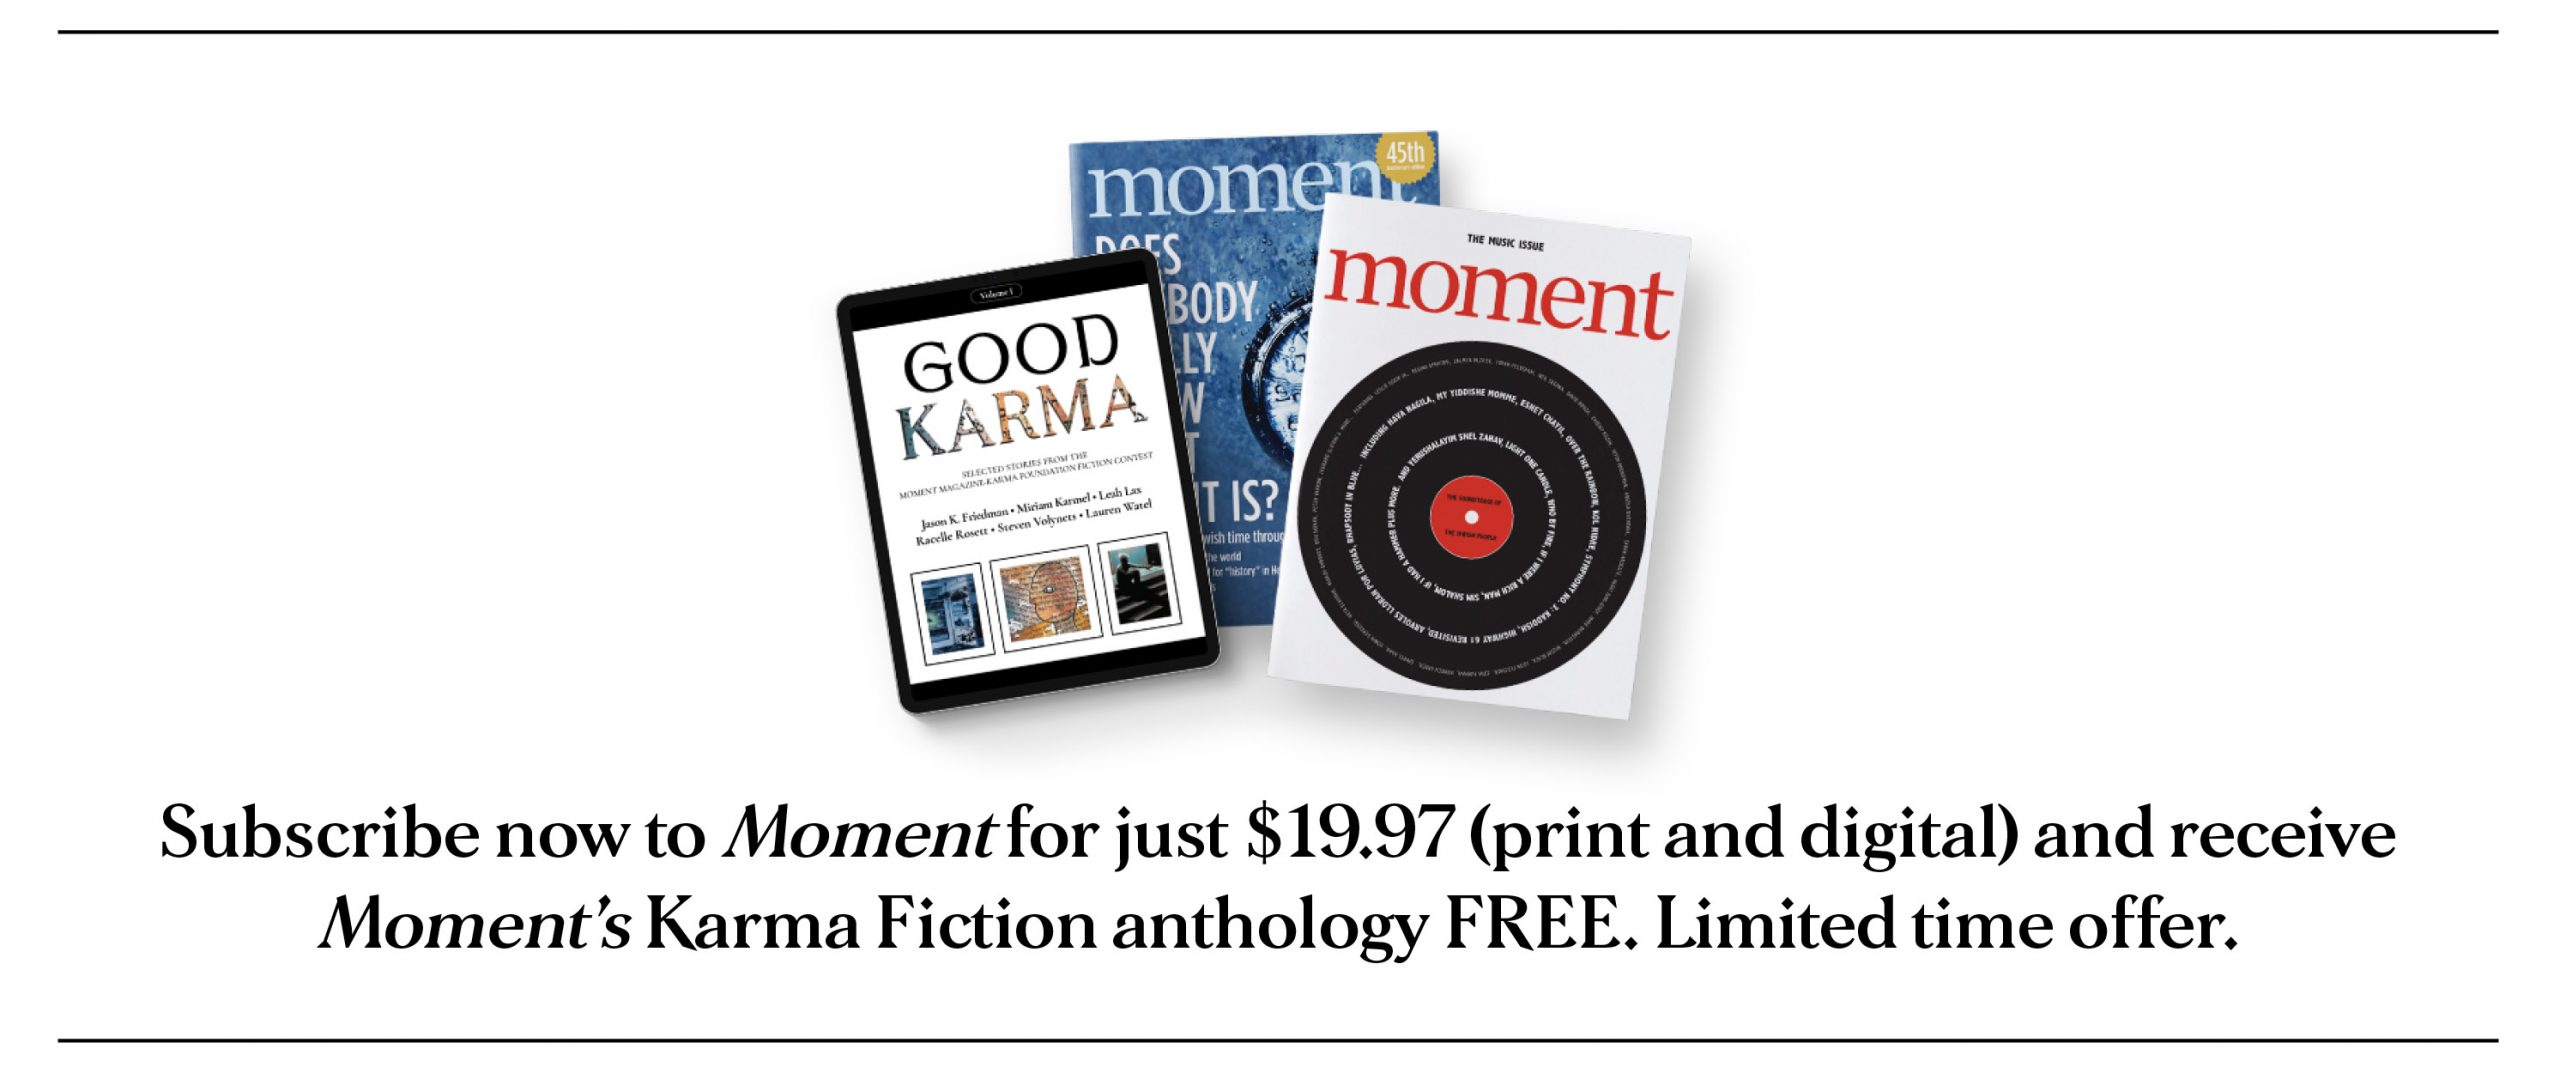 Moment for only $19.97...Sign up now and get Good Karma for free